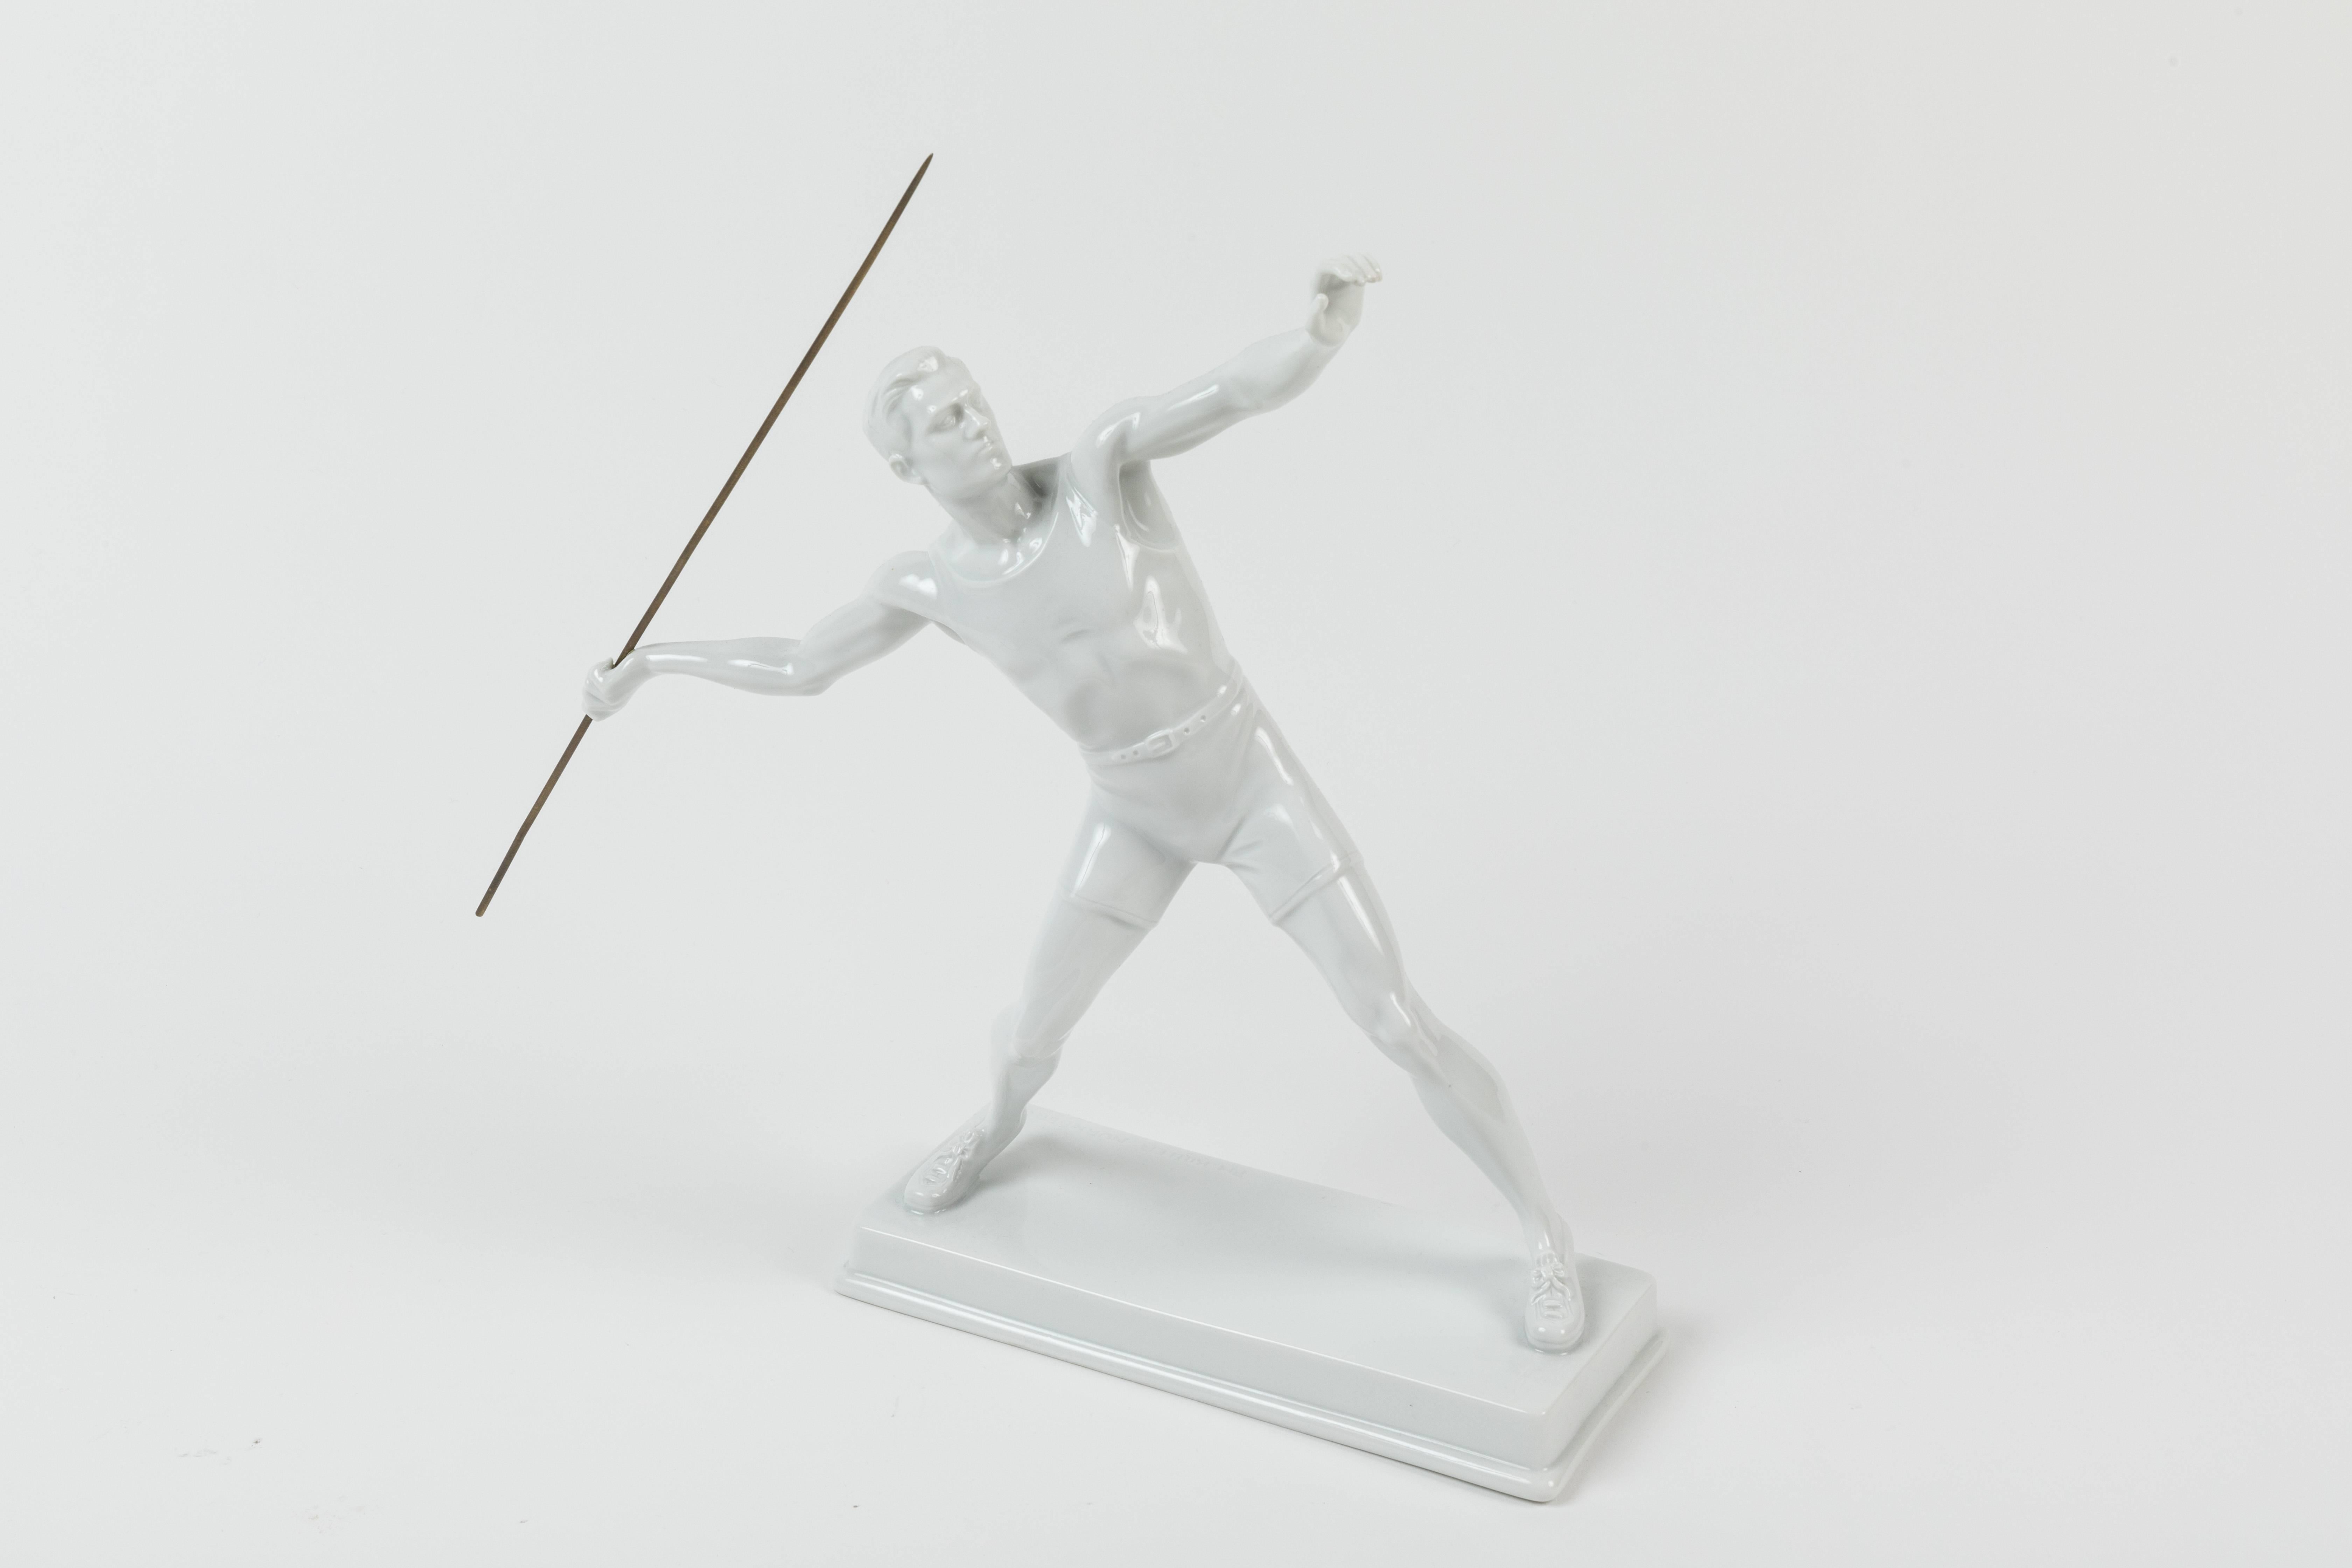 A dynamic pair of porcelain athlete figurines designed by Philipp Kittler for Rosenthal. One depicting a 